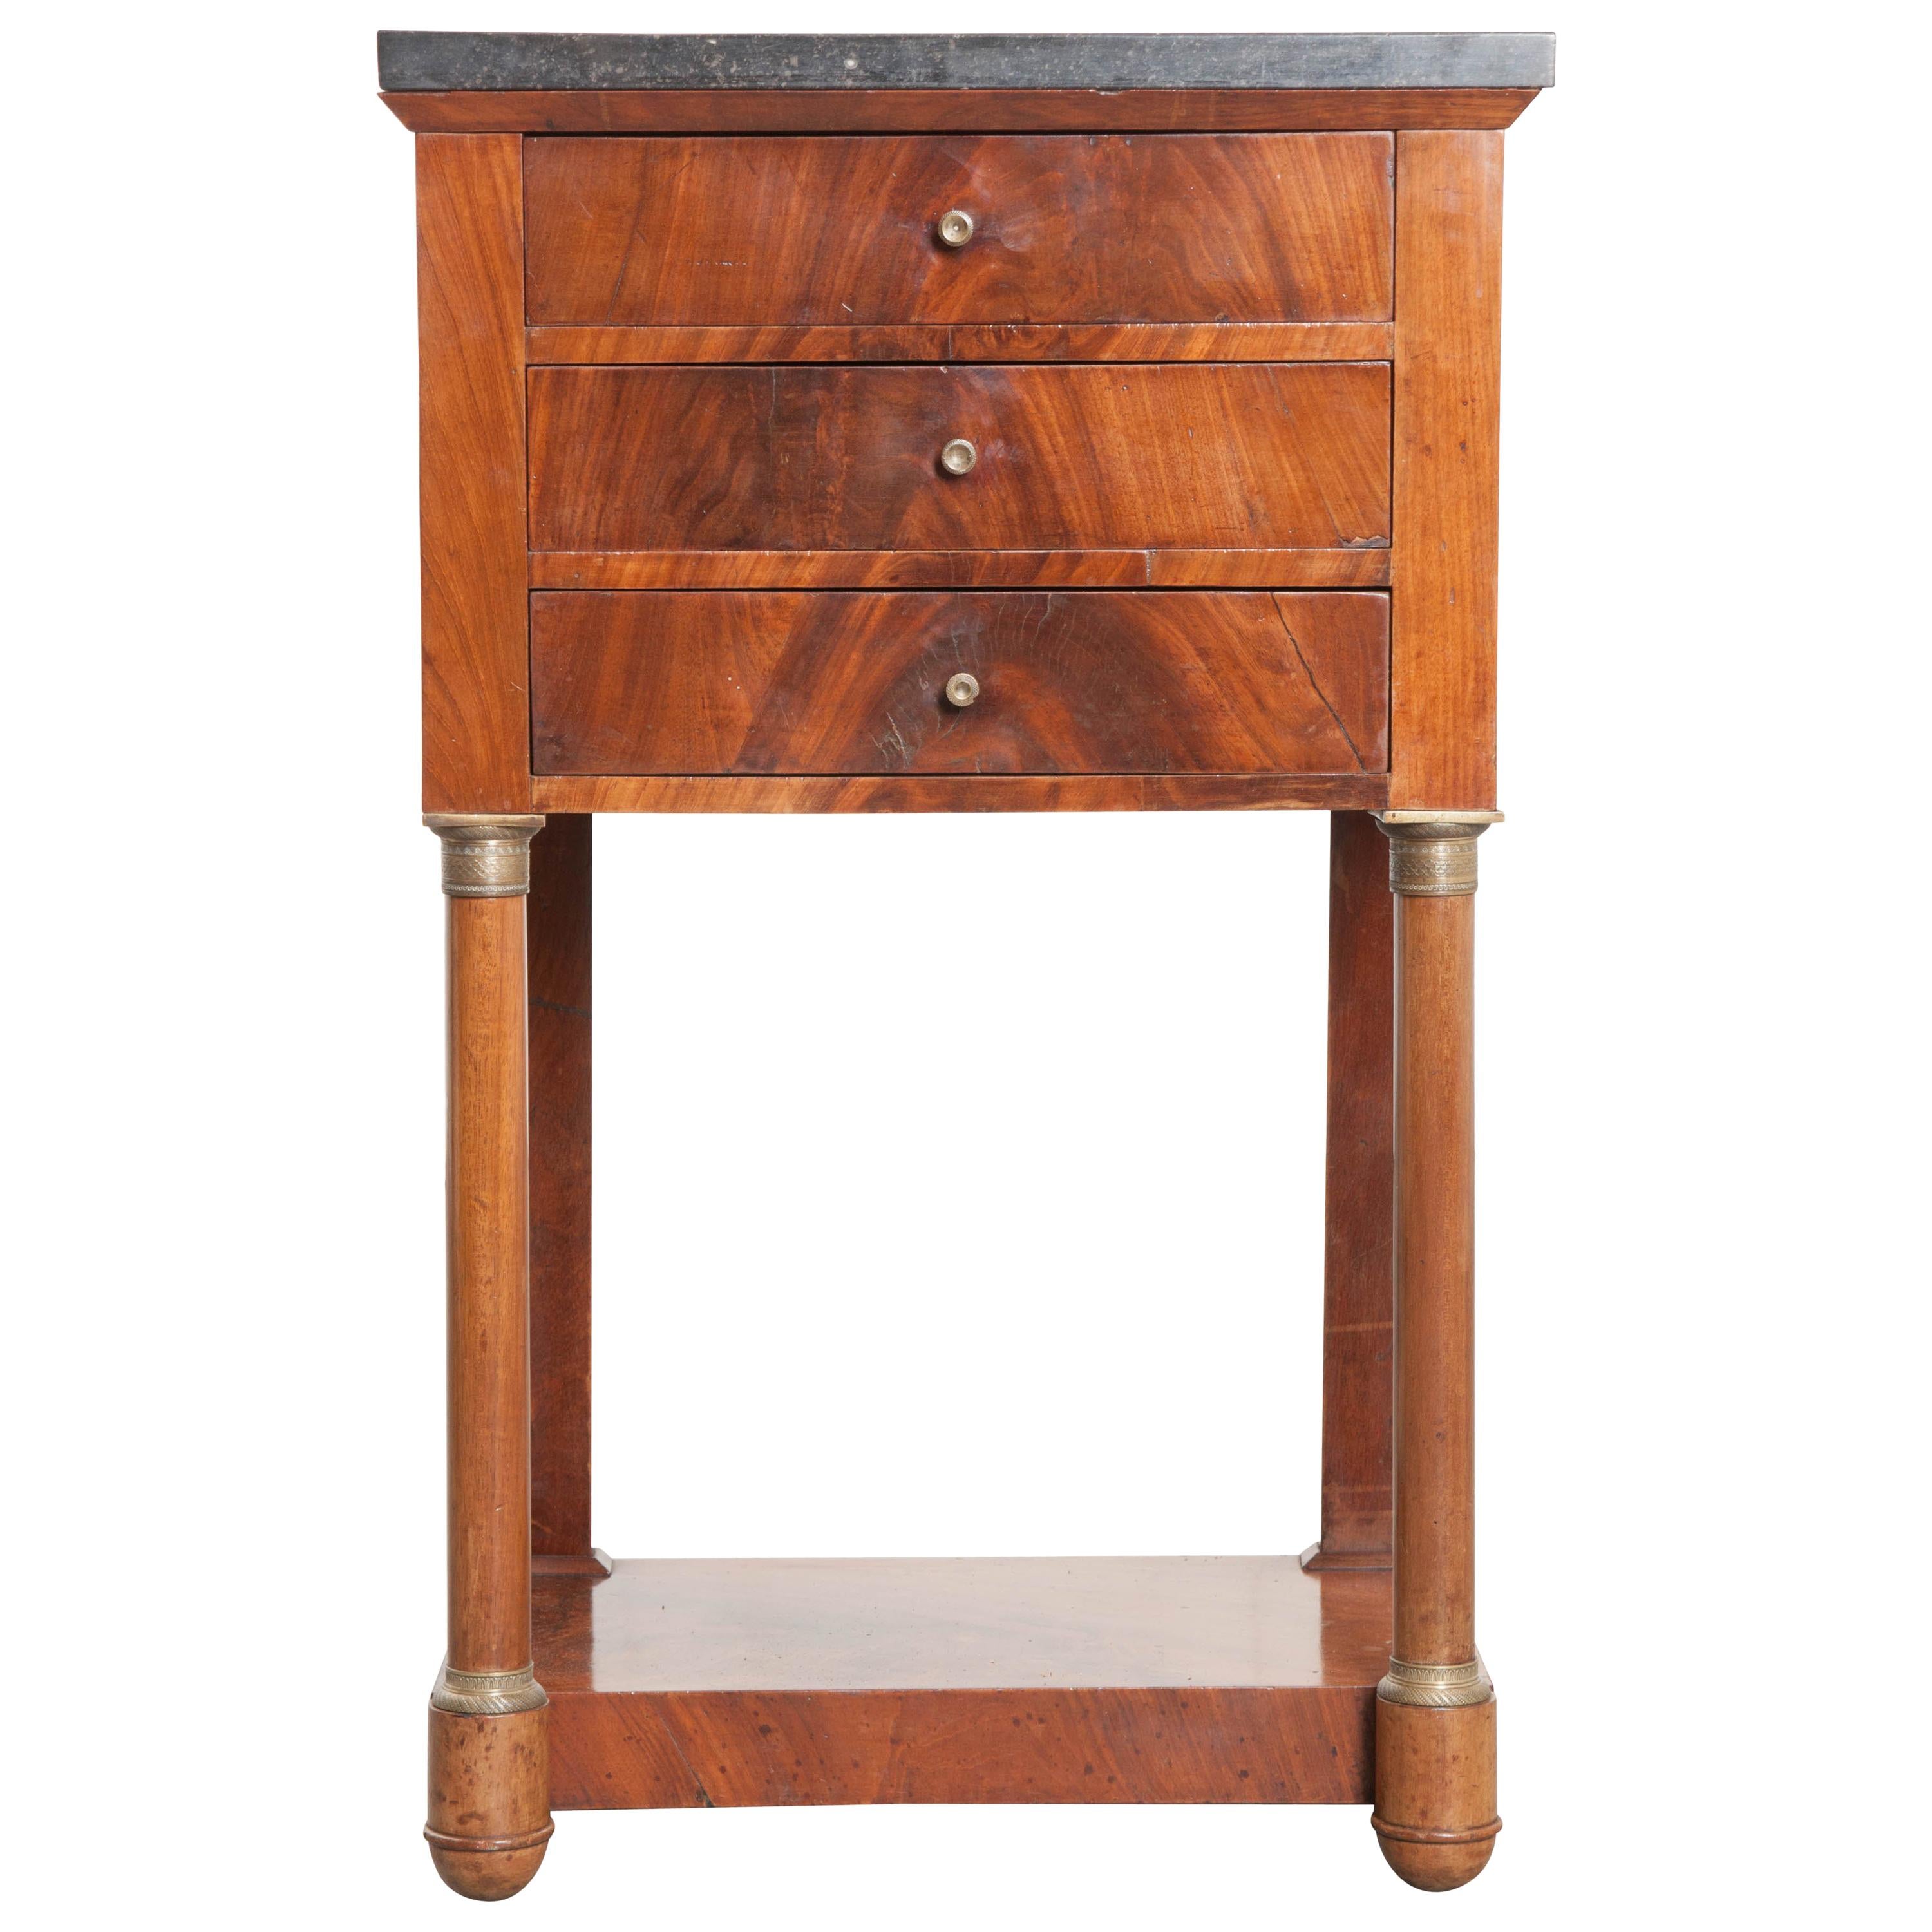 French Early 20th Century Empire Style Mahogany Bedside Table